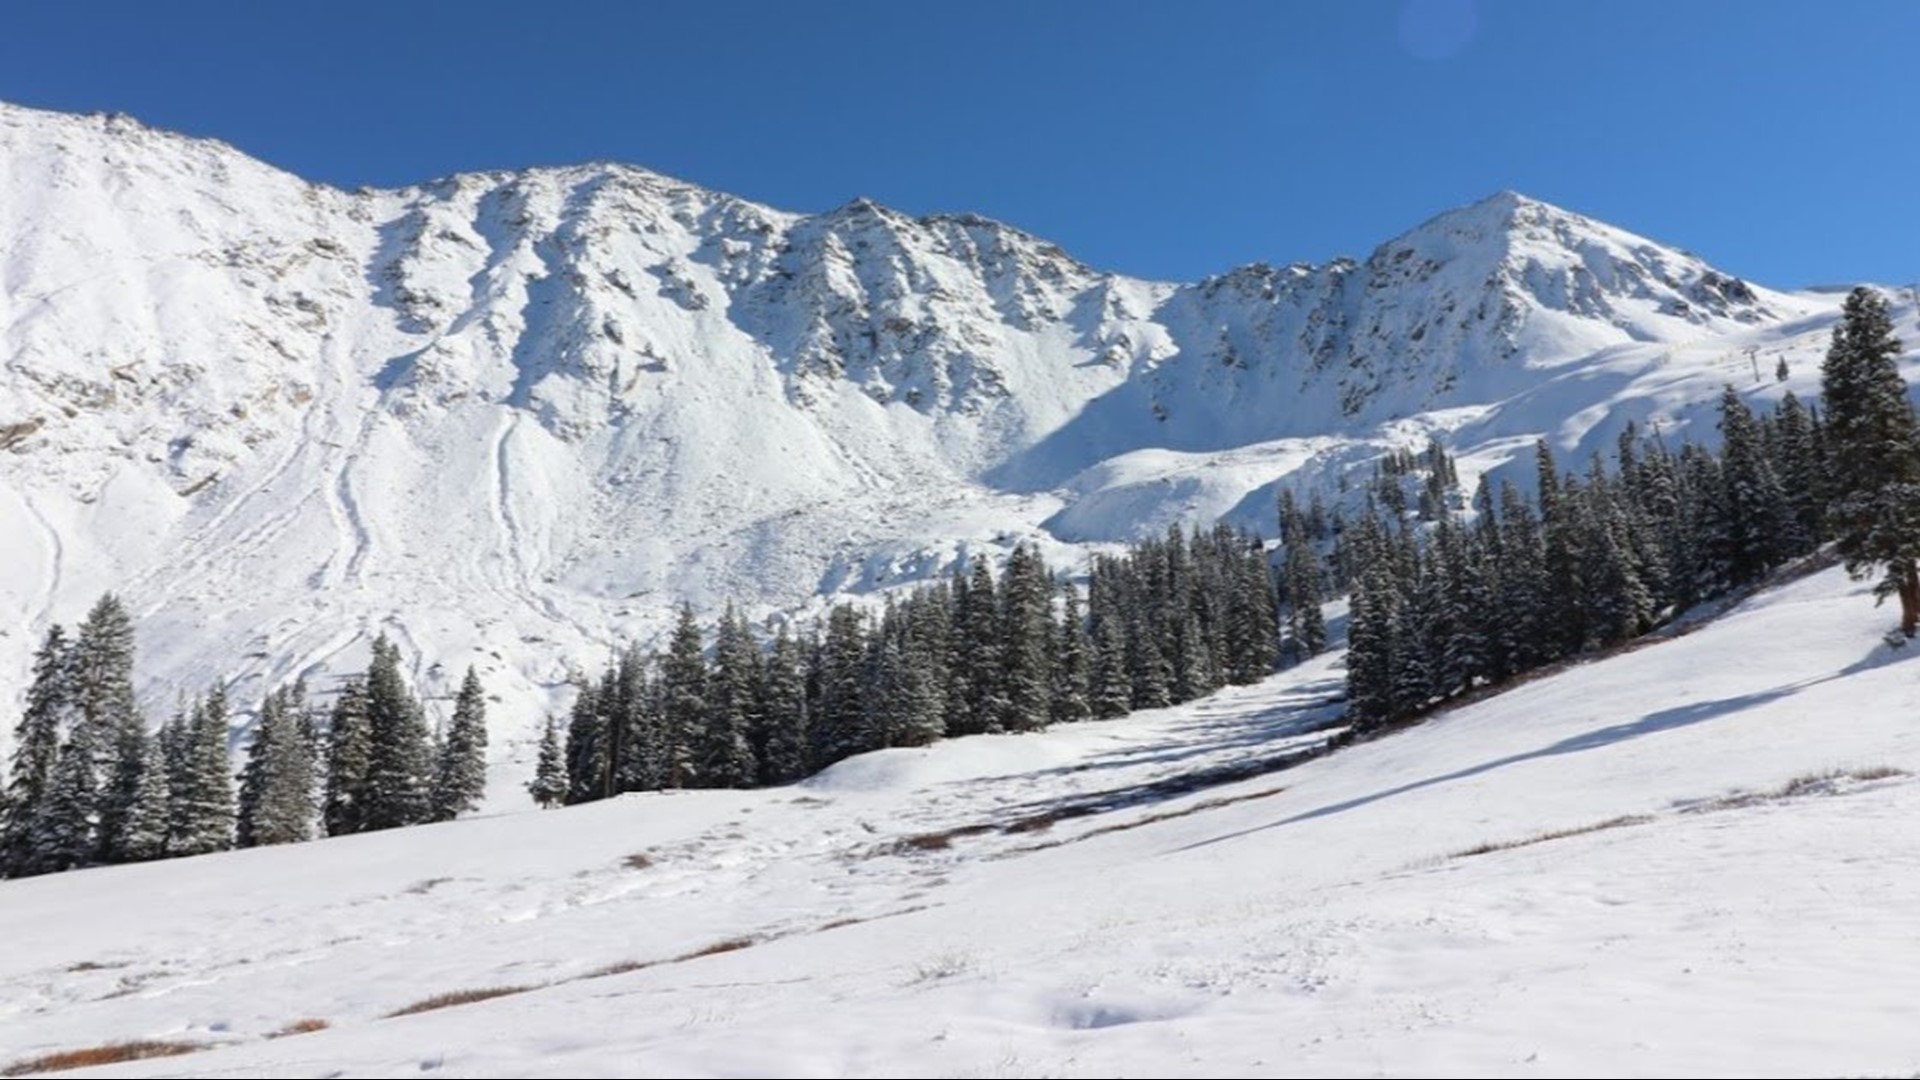 A-Basin is closed and Copper Mountain is only partially open.